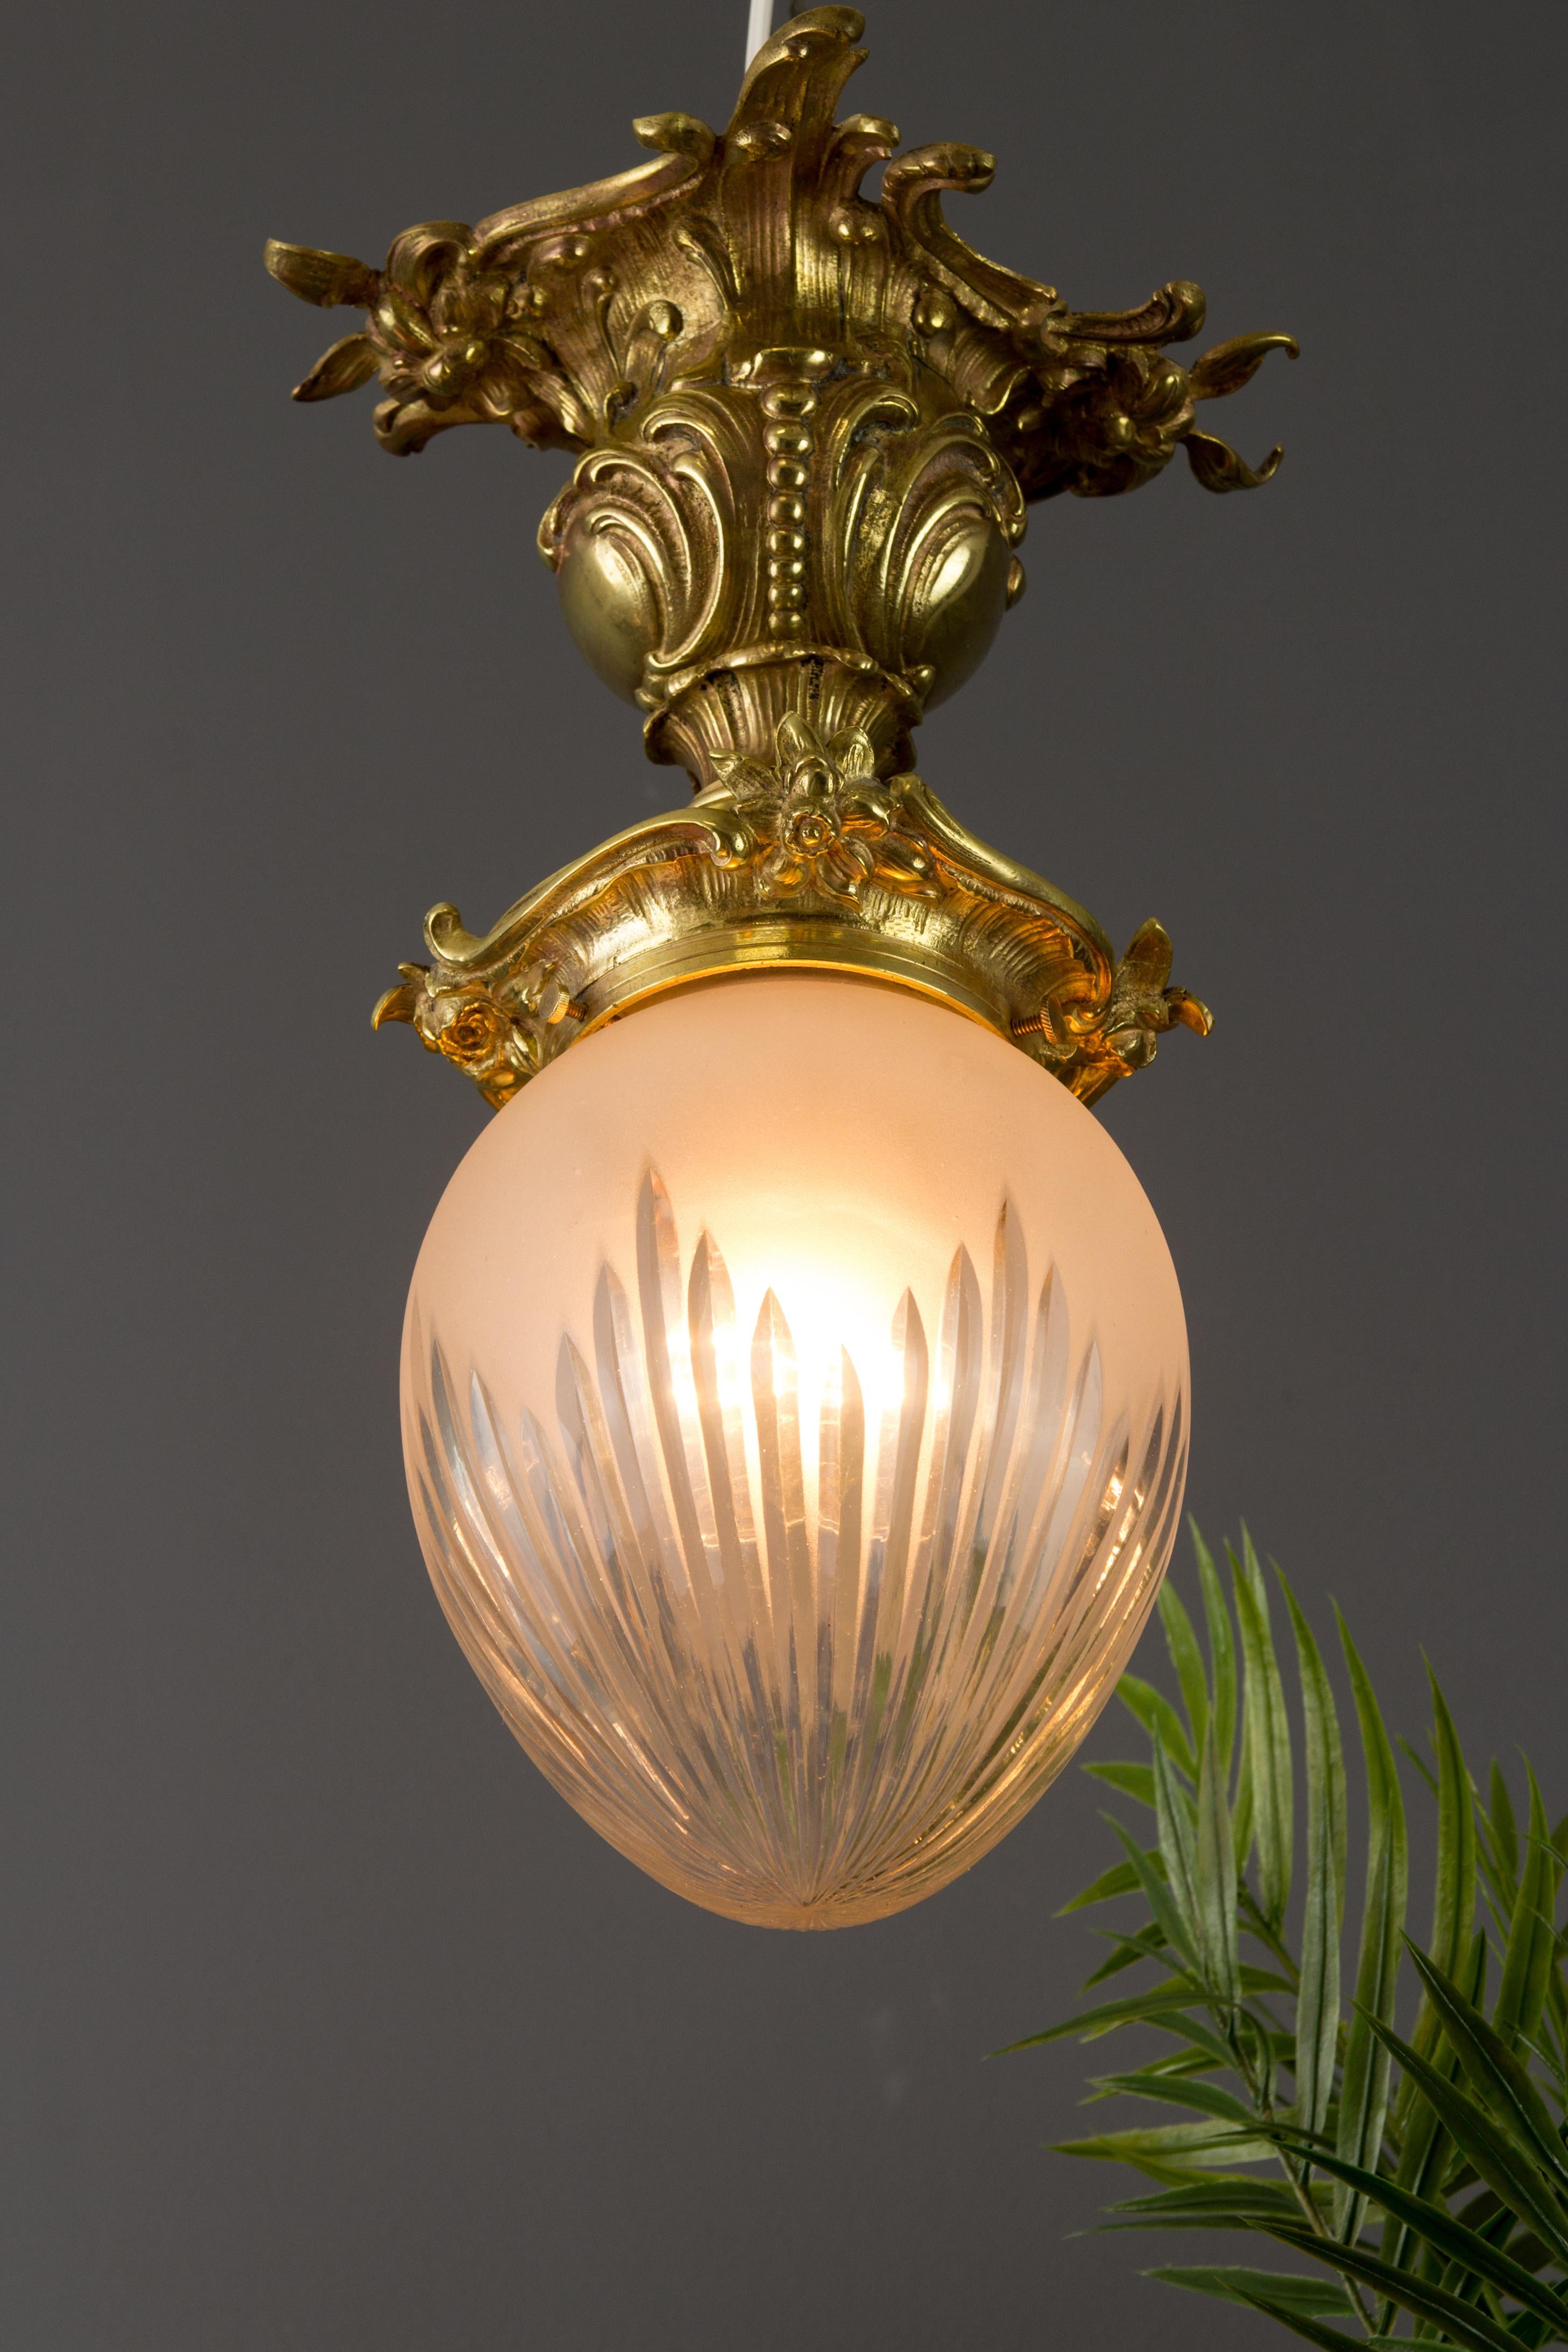 Adorable Rococo or Louis XV style ceiling light. The light fixture is made of bronze and ornate with beautiful Rococo curved decorations - rocailles, leaves, and flowers. White frosted and cut glass shade, one socket for E27 / E26 size light bulb.